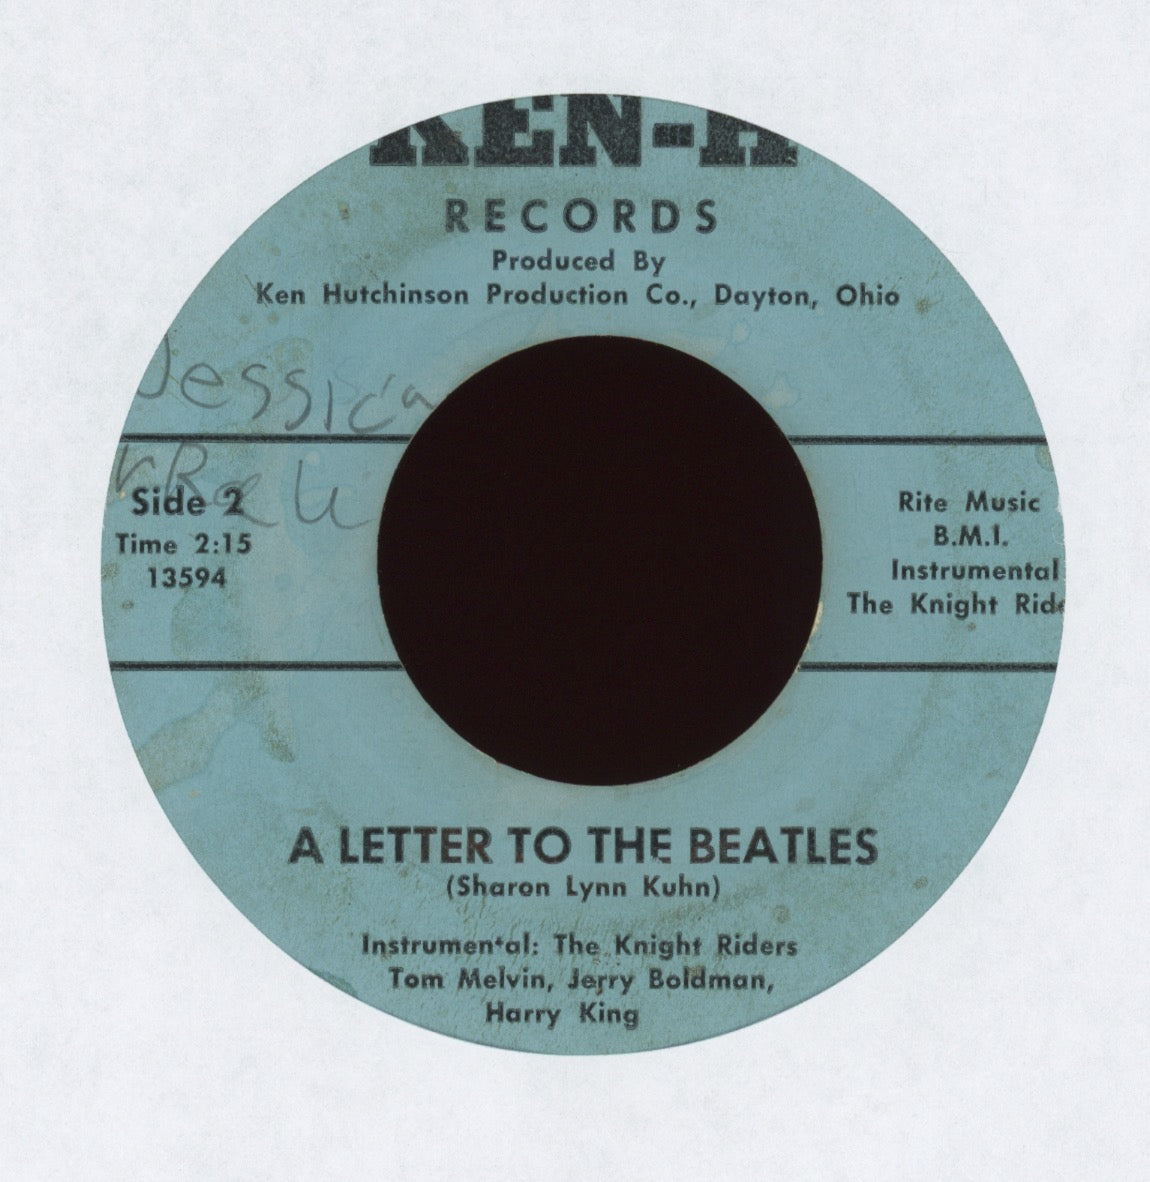 The Knight Riders - A Letter To The Beatles on Ken-H Teen Garage Beat 45